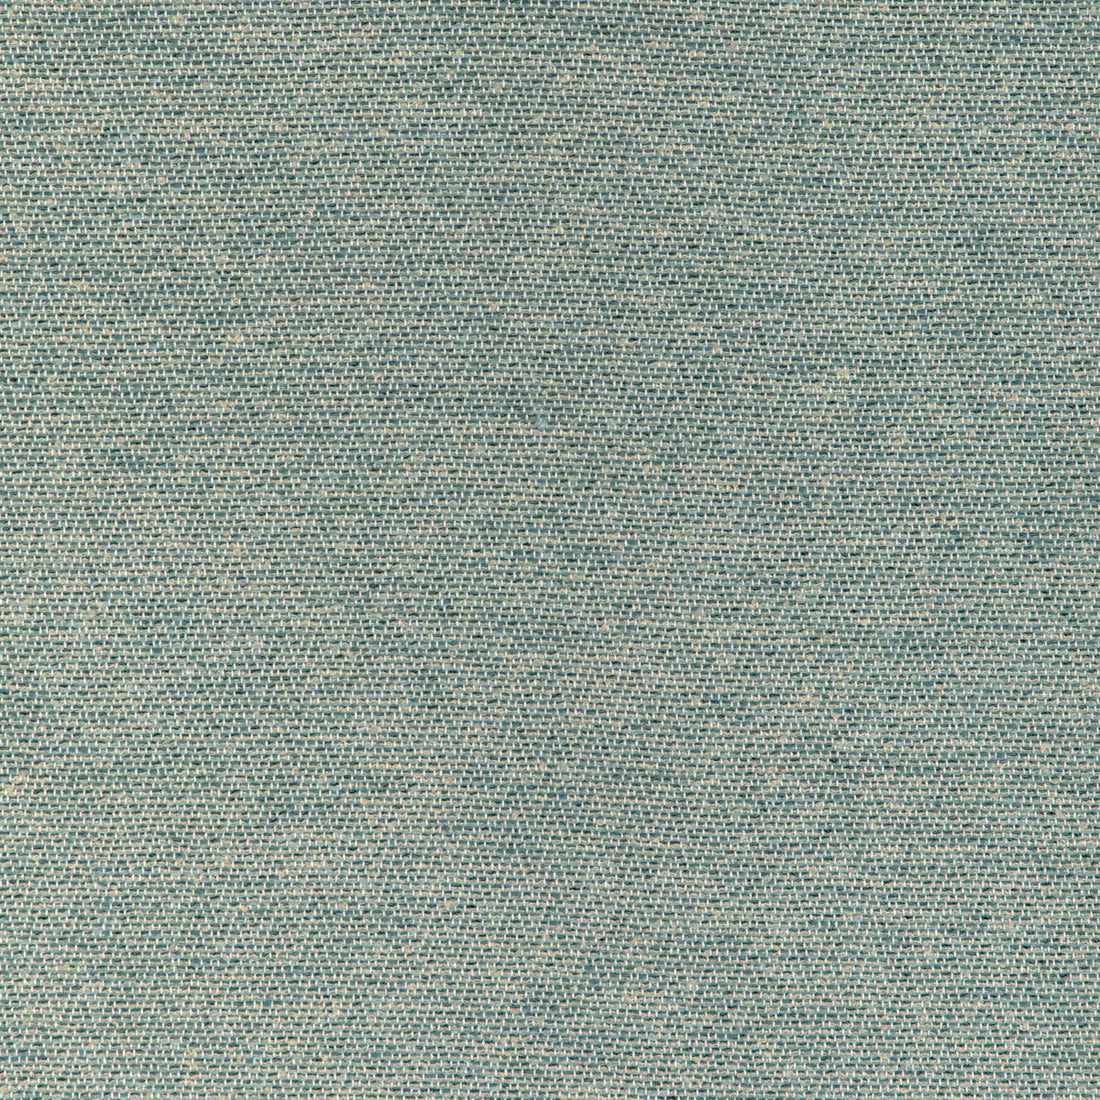 Beauvoir Texture fabric in aqua color - pattern 8023153.113.0 - by Brunschwig &amp; Fils in the Chambery Textures IV collection